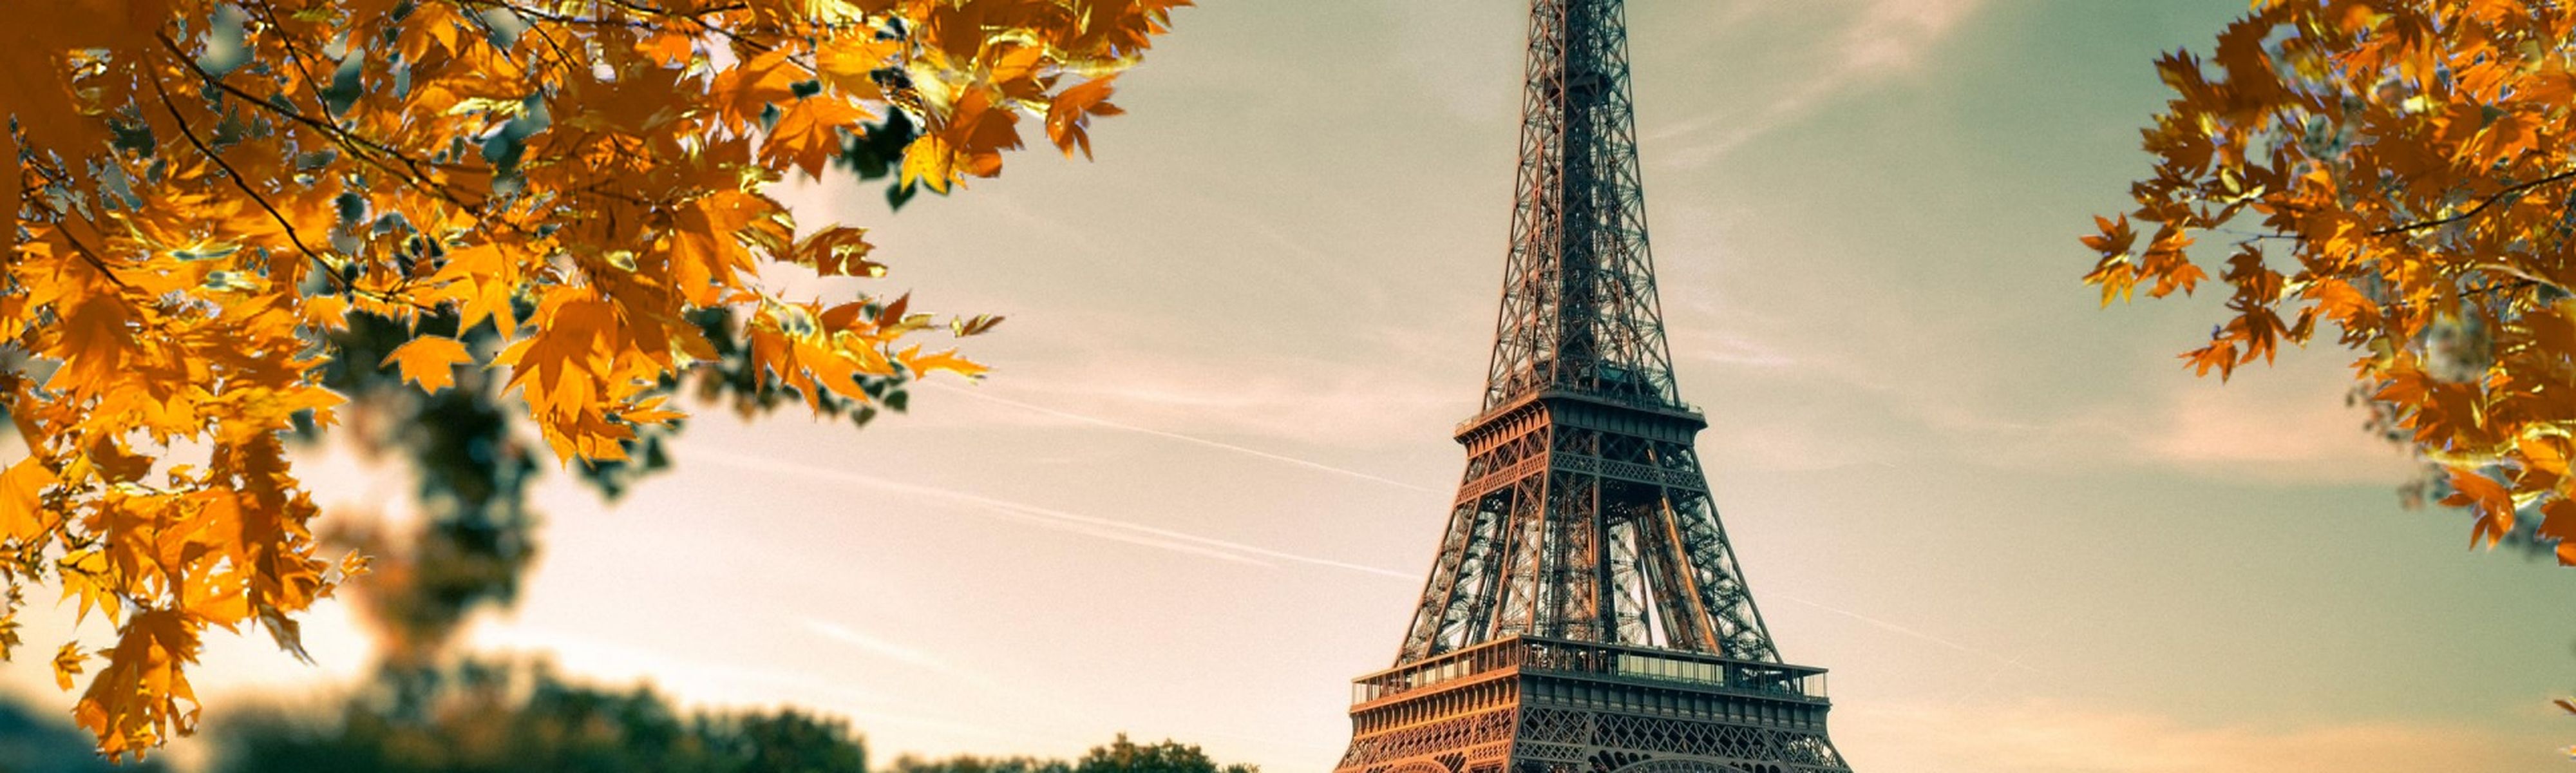 yellow leaves on trees surrounding eiffel tower in paris france